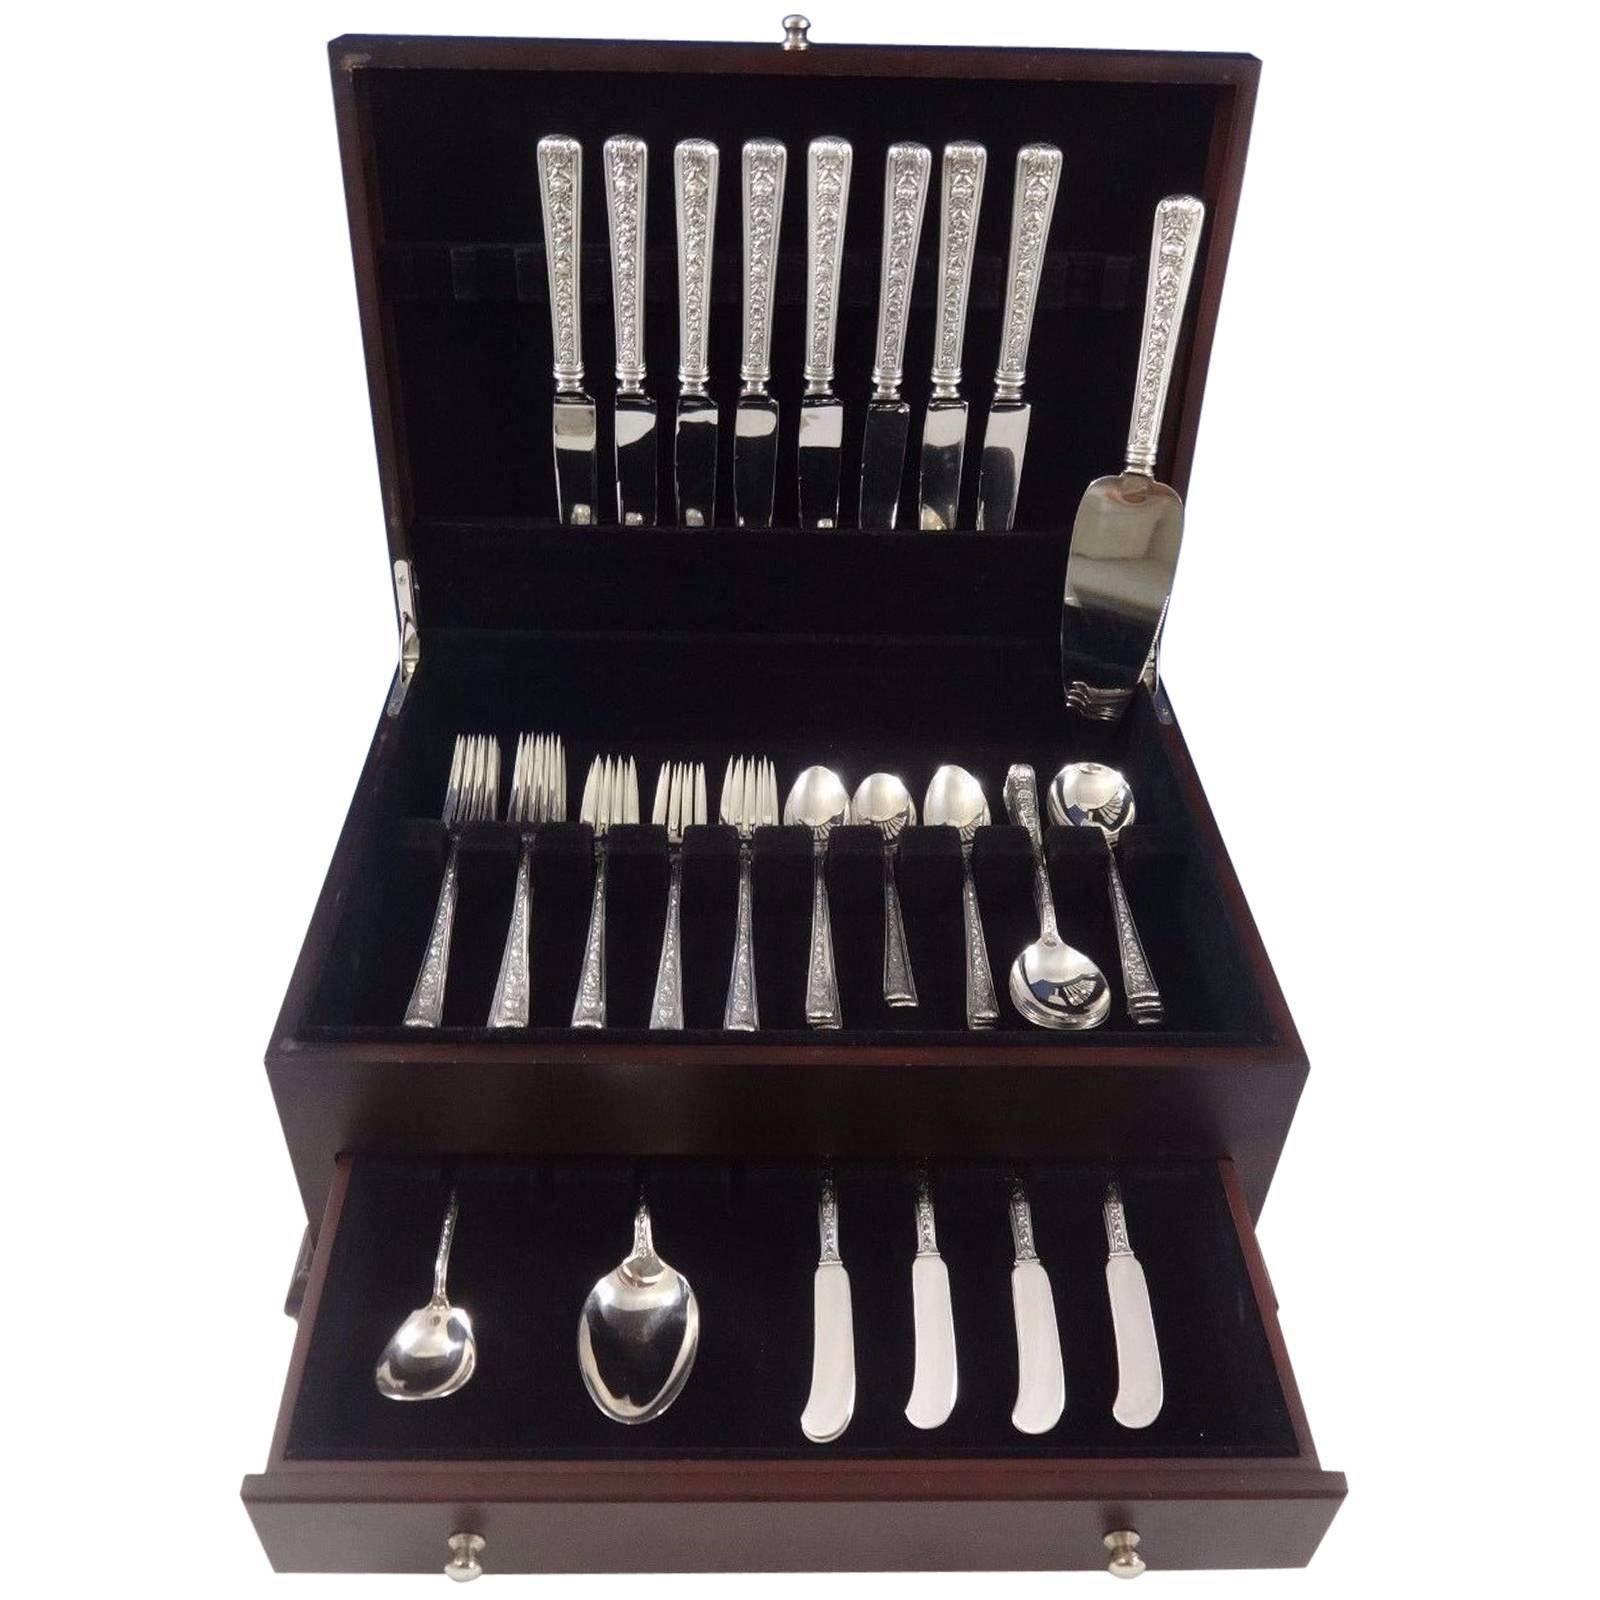 Beautiful Windsor Rose by Watson sterling silver flatware set, 51 pieces. This set includes:

Eight knives, 9